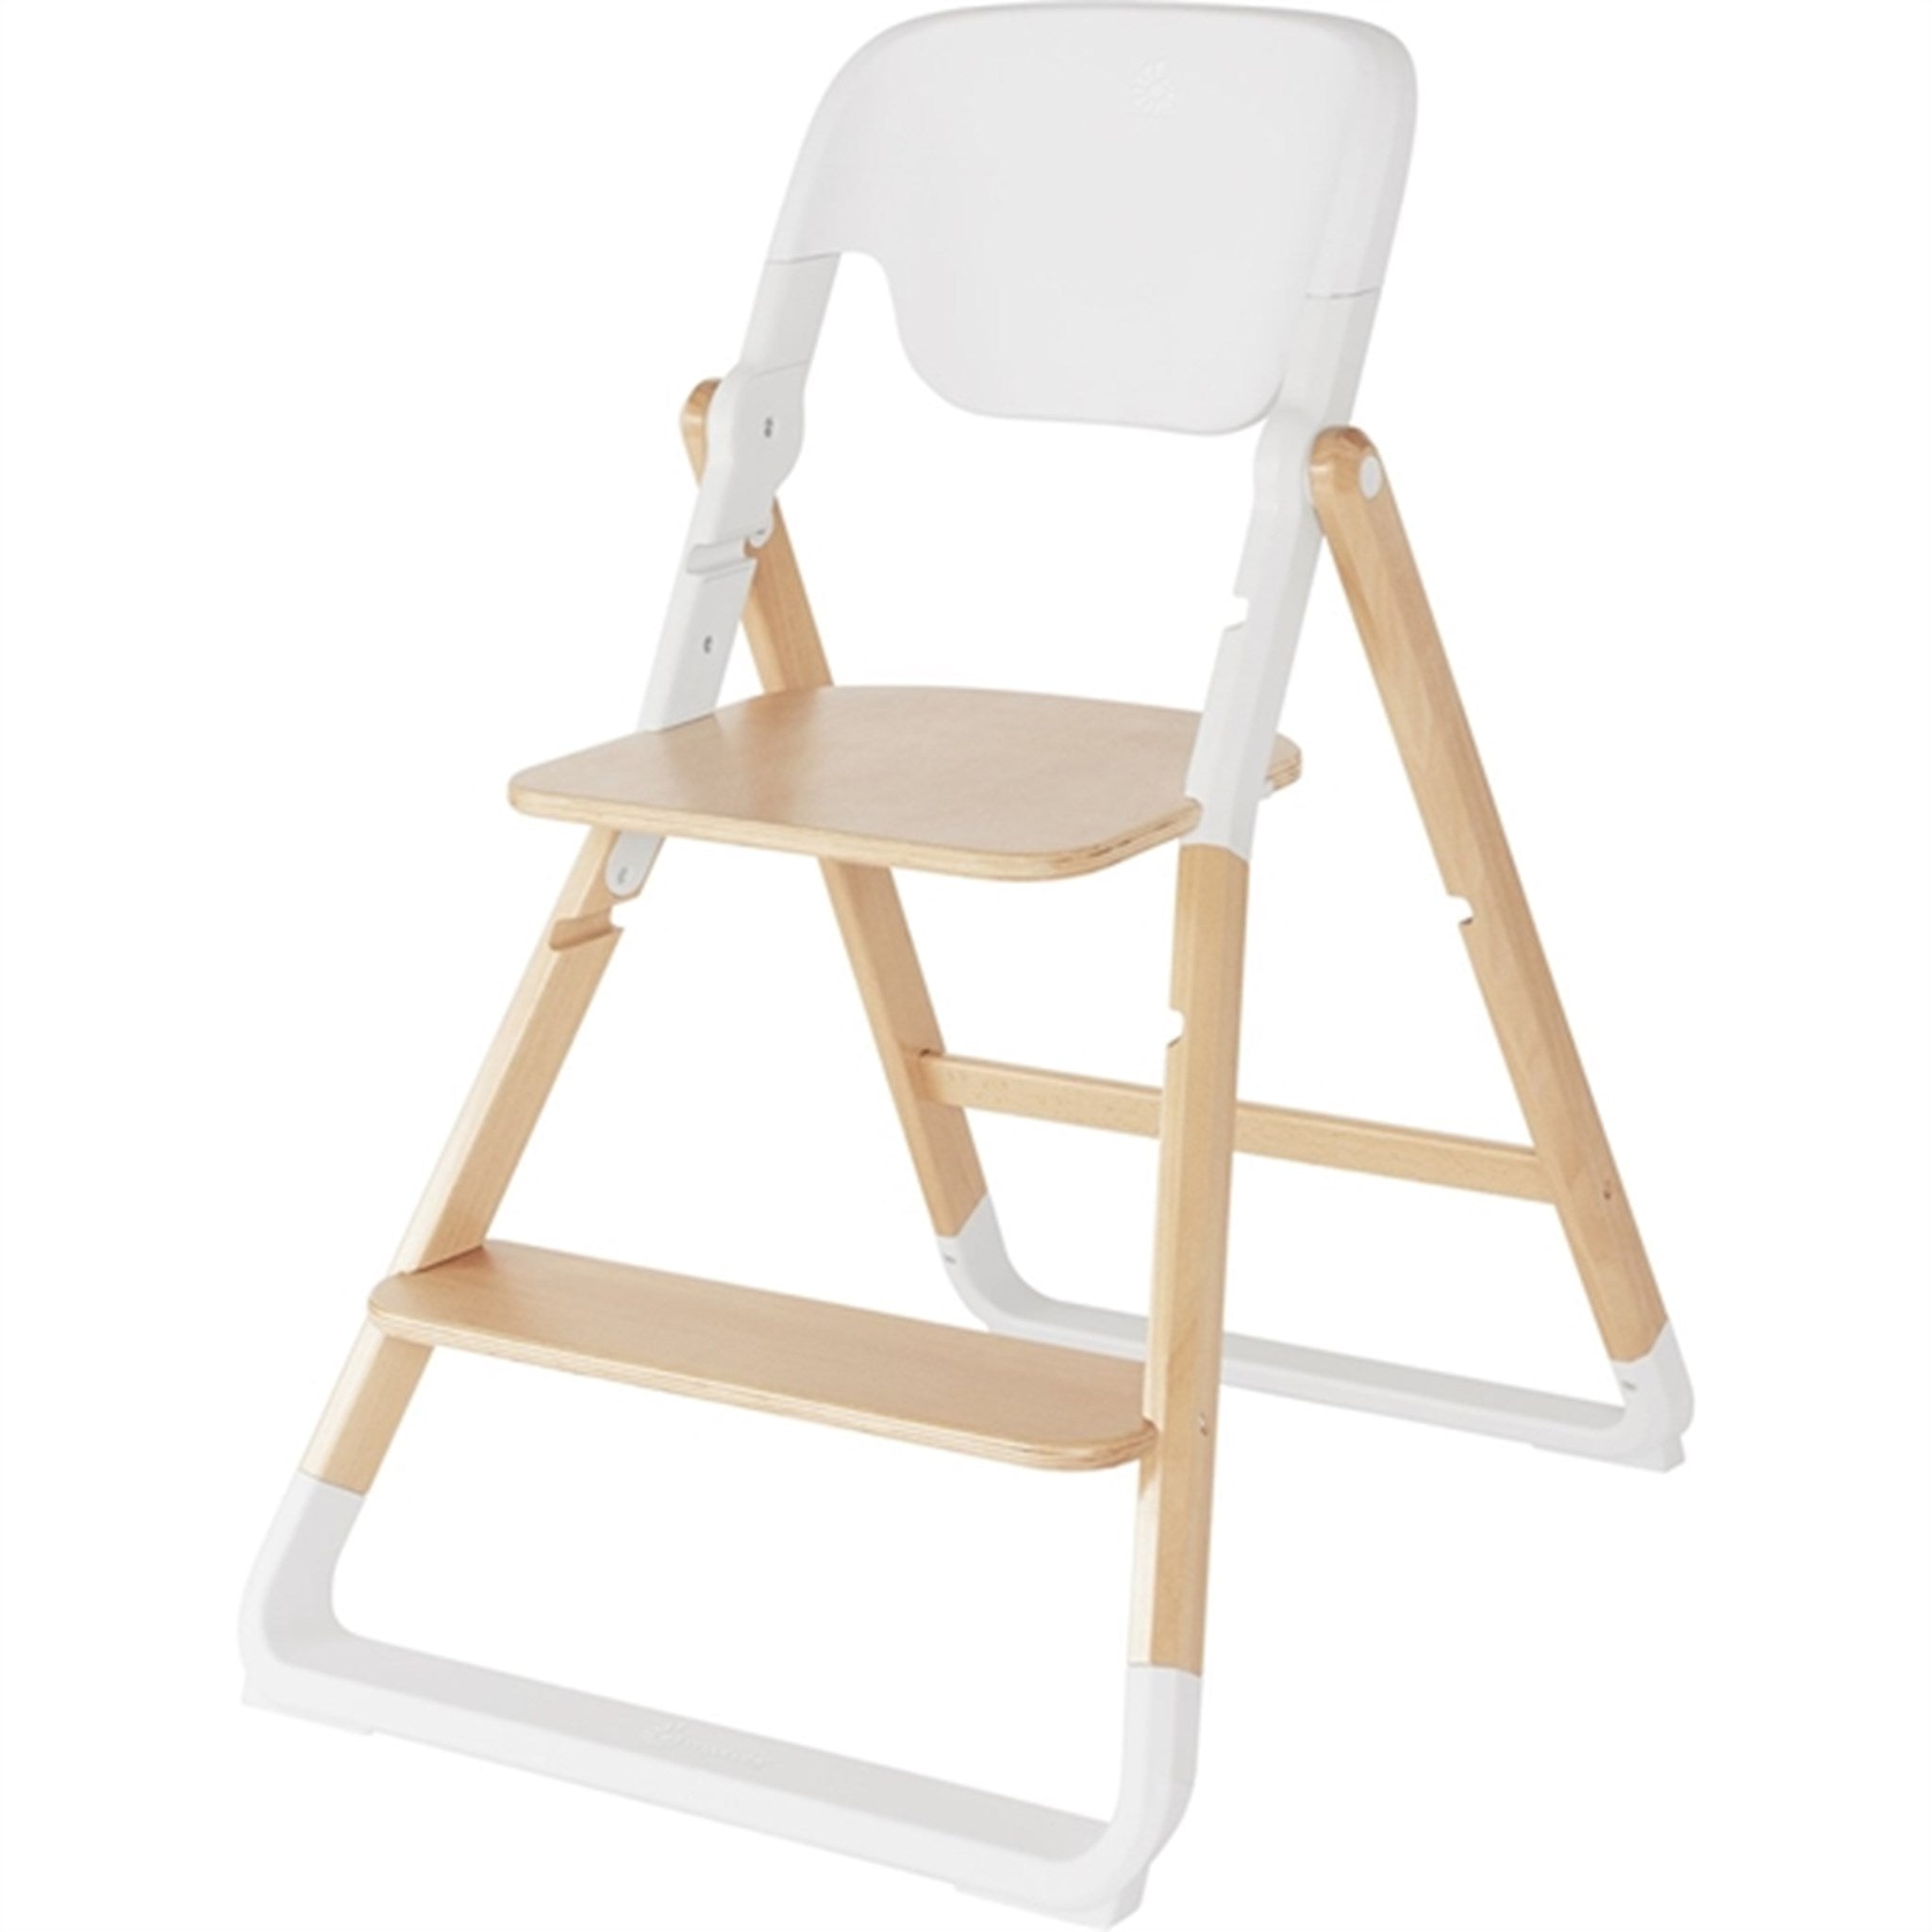 Ergobaby Evolve 2-in-1 High Chair + Chair Natural Wood White 8